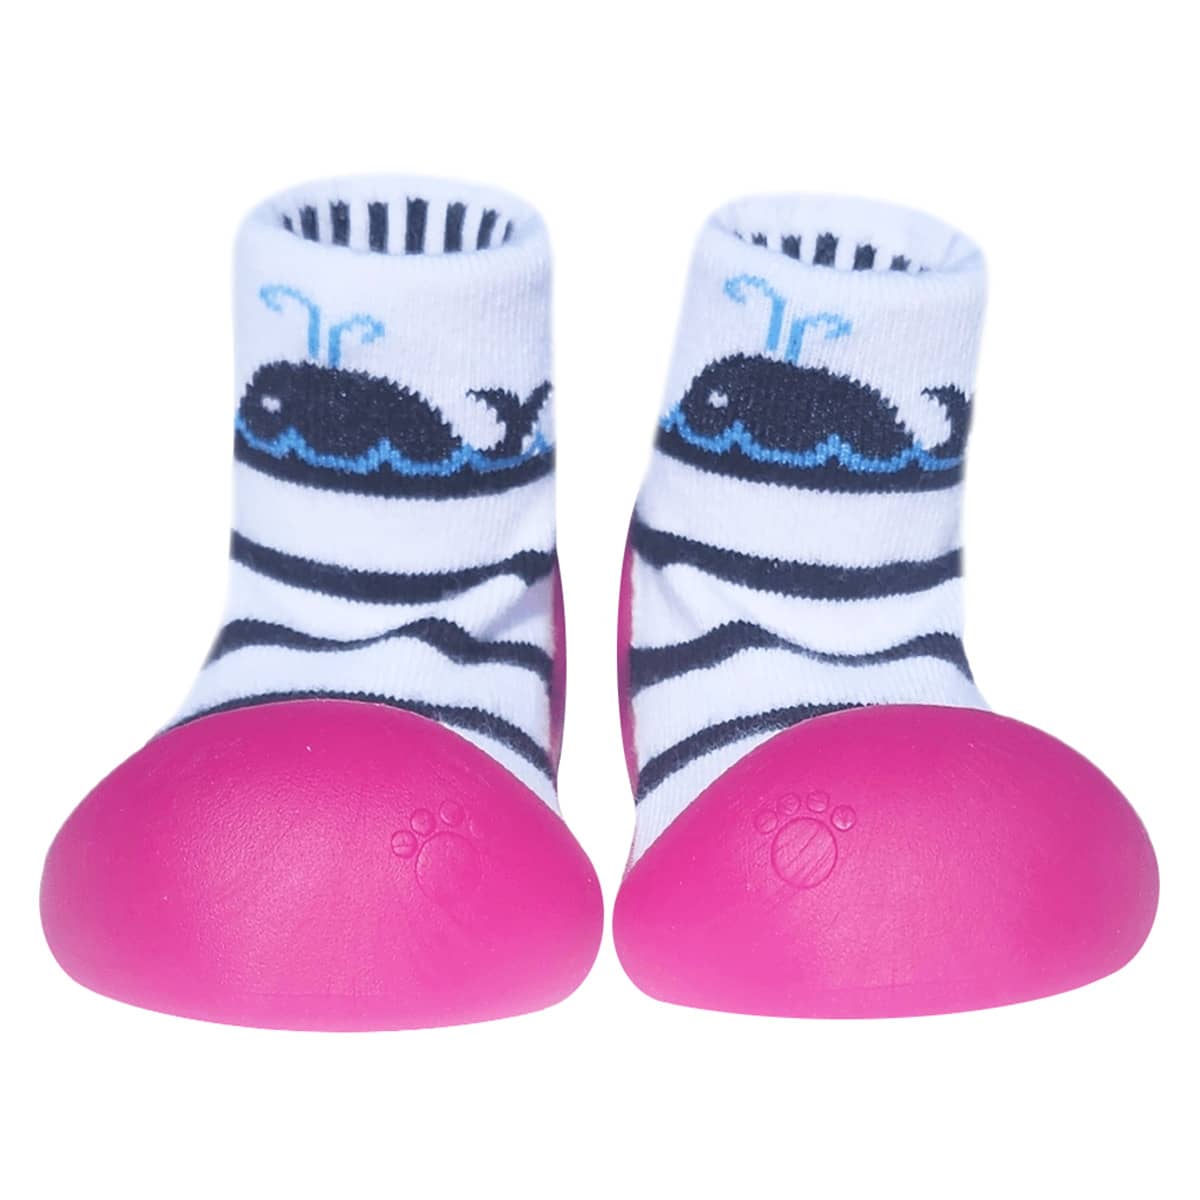 BigToes First Walker Shoes - Chameleon - Whale Pink